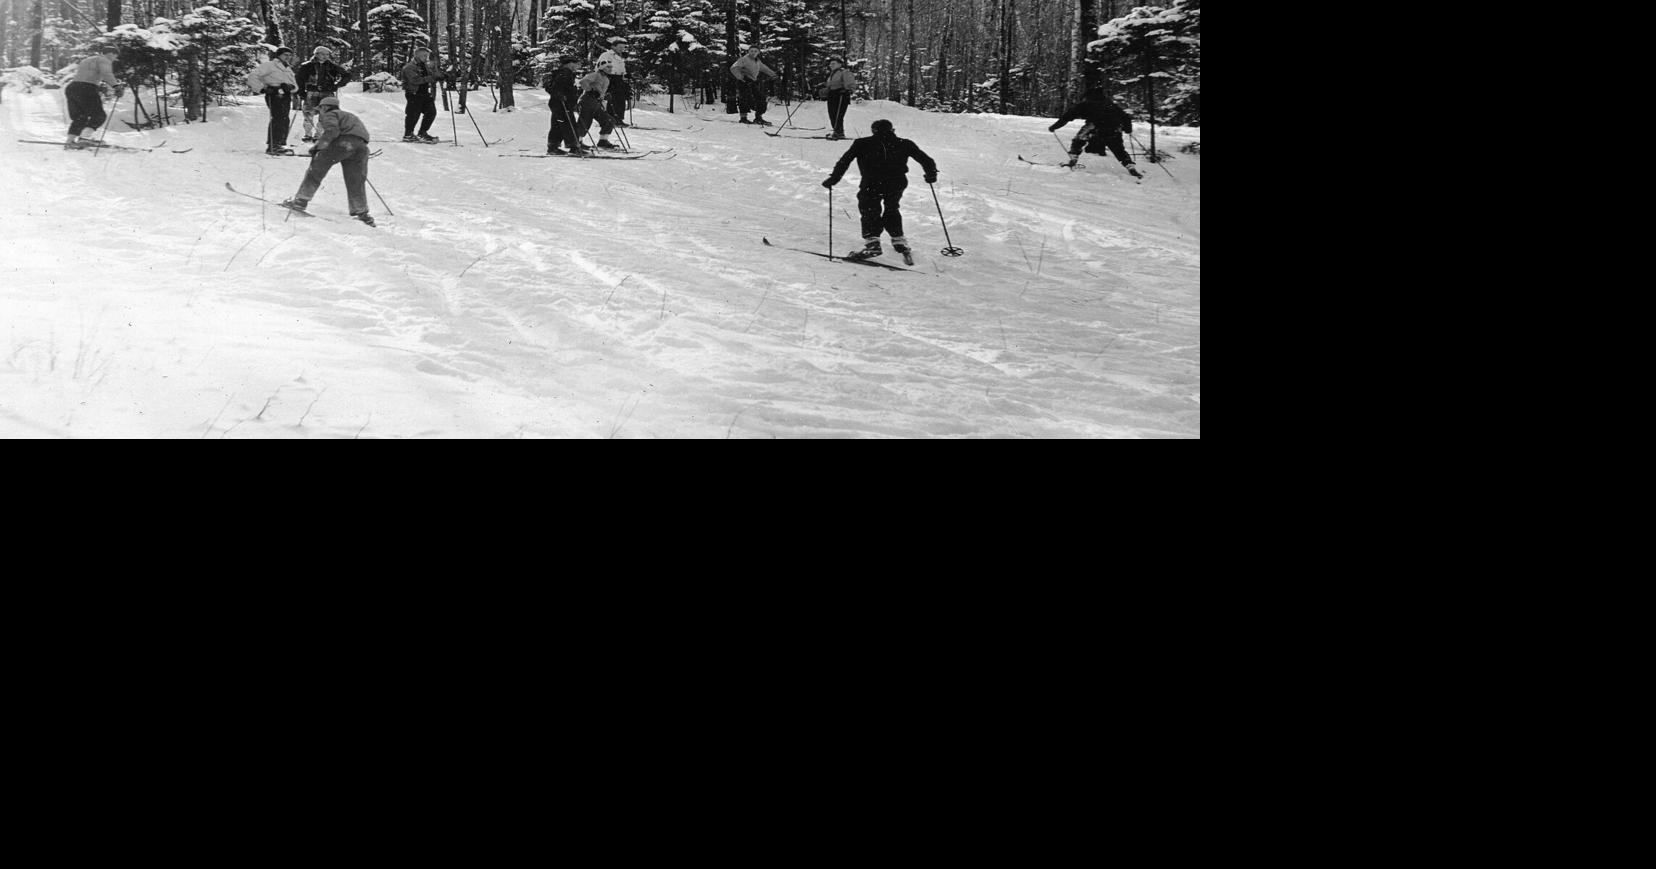 When skiing meant climbing | Camden Herald | knox.villagesoup.com